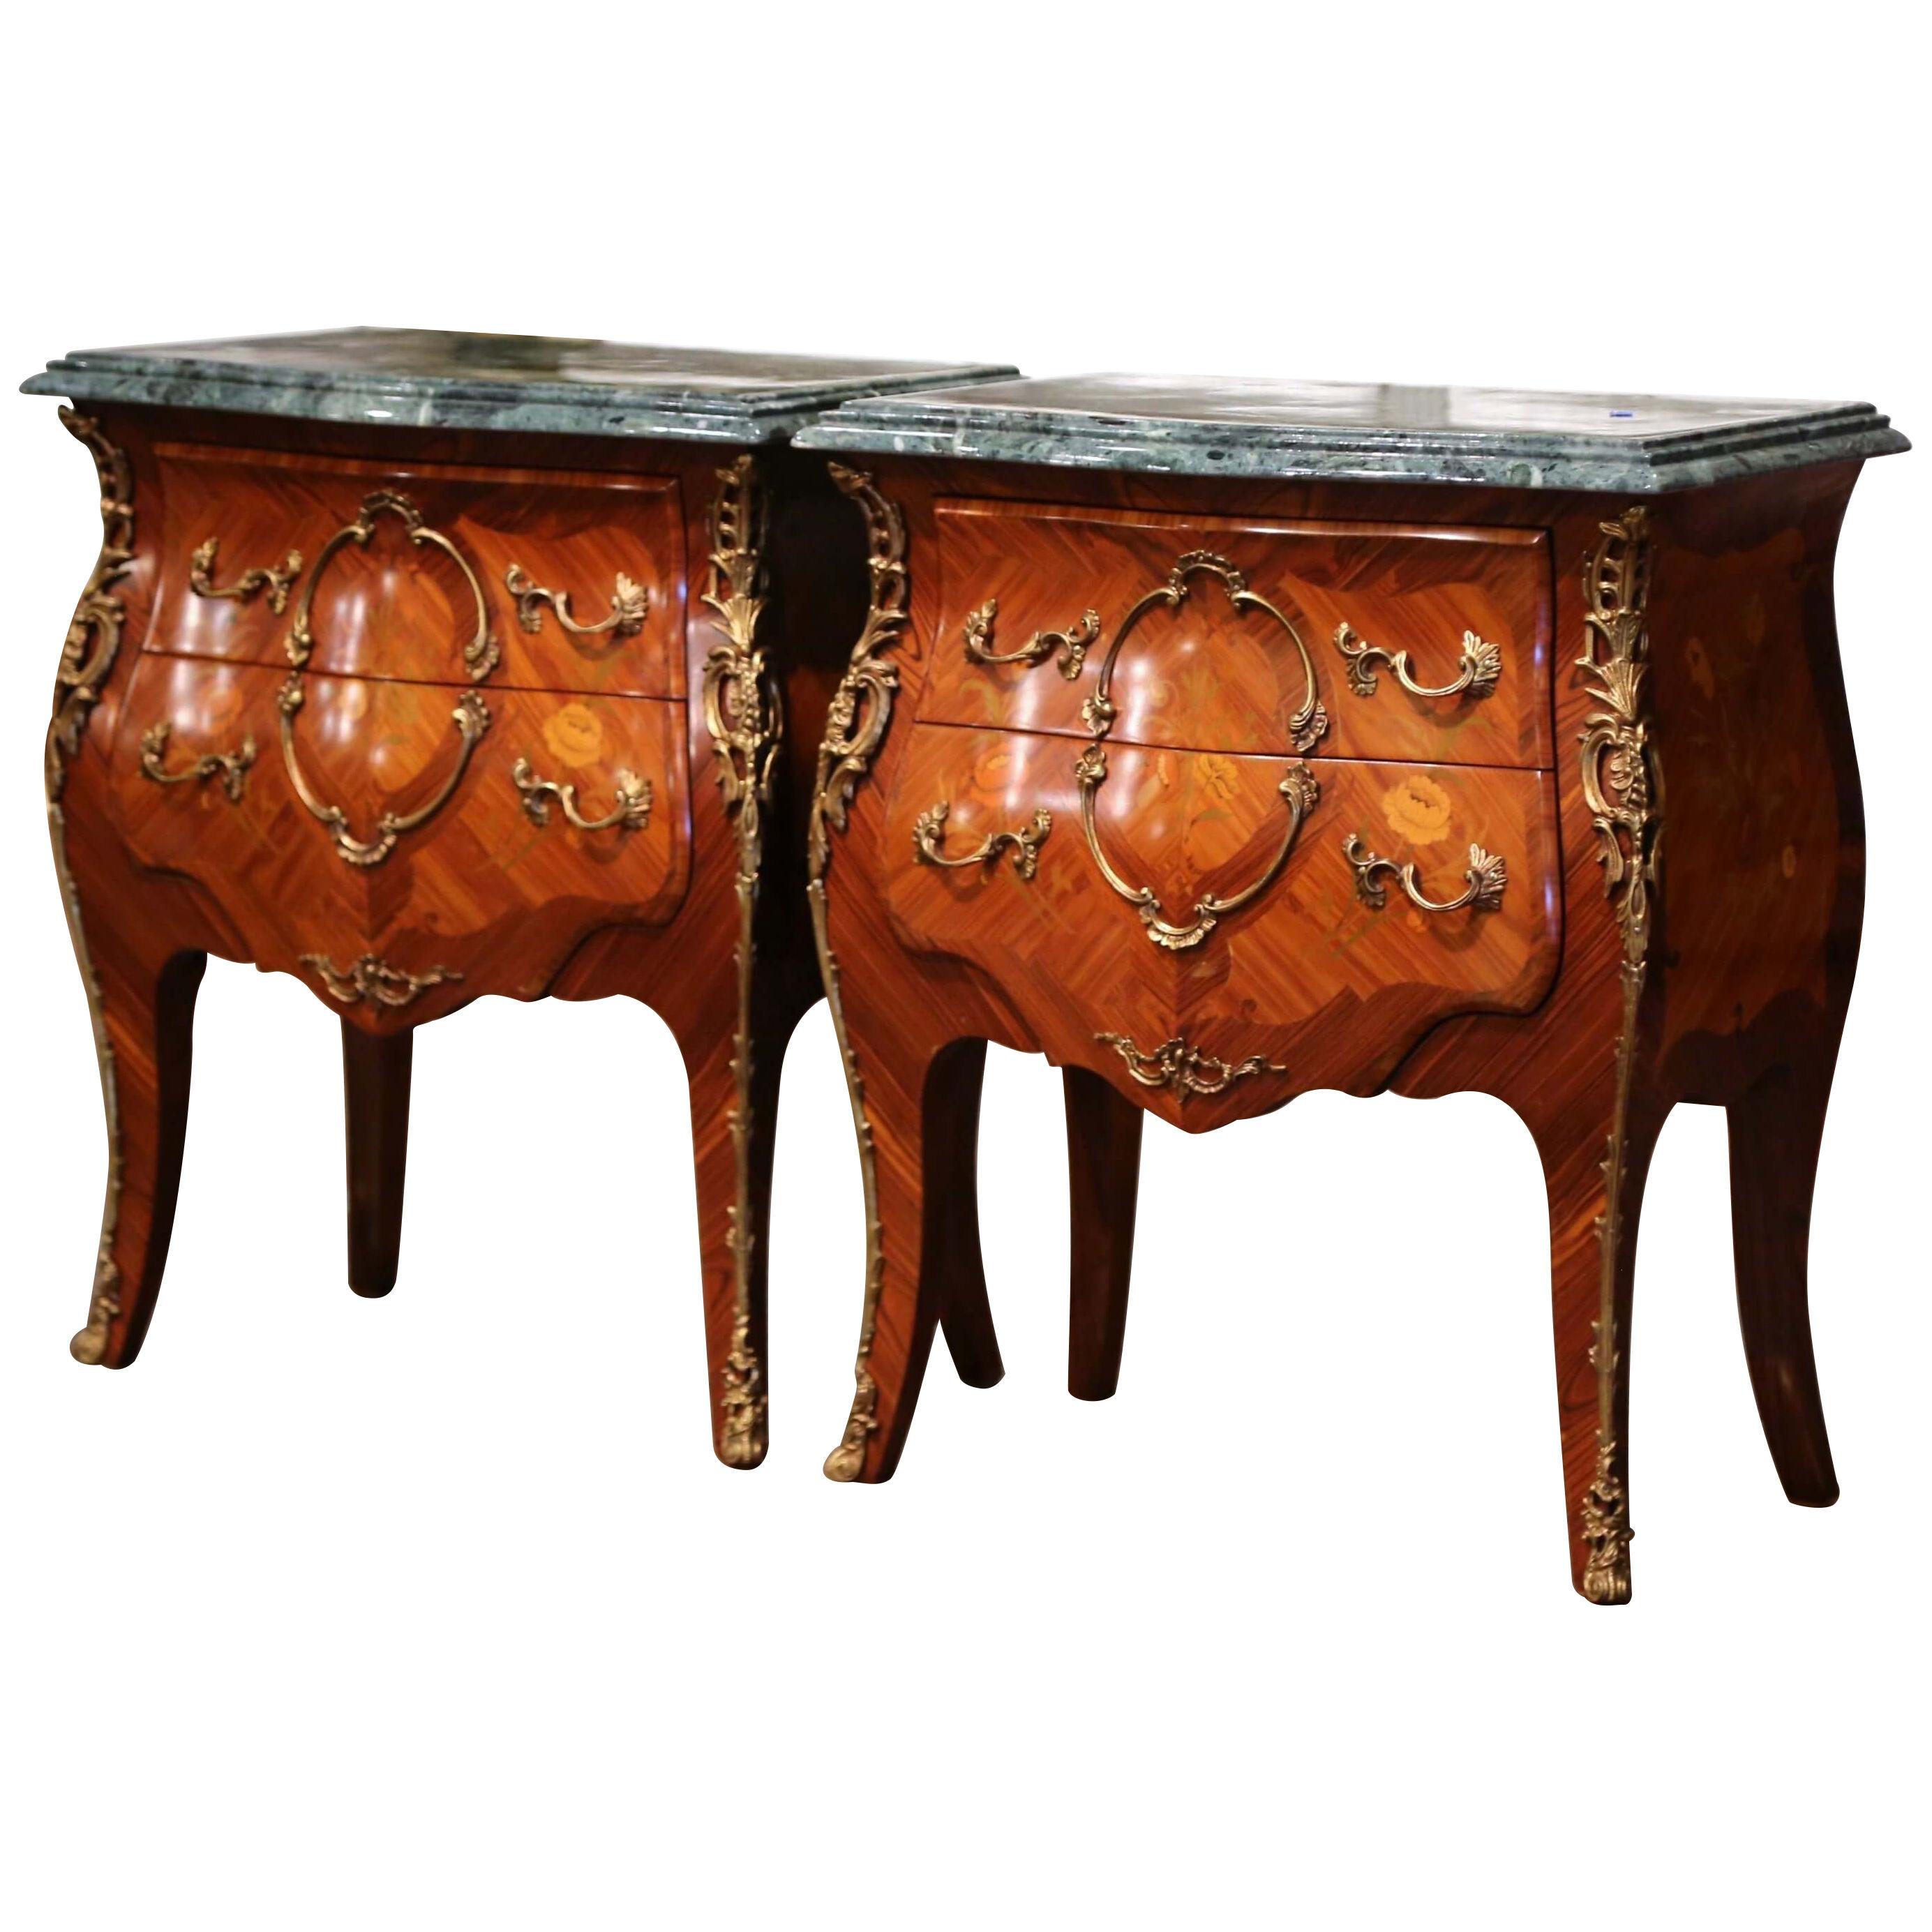 Pair of Louis XV Marble Top Marquetry Inlaid Walnut and Bronze Bombe Nightstands